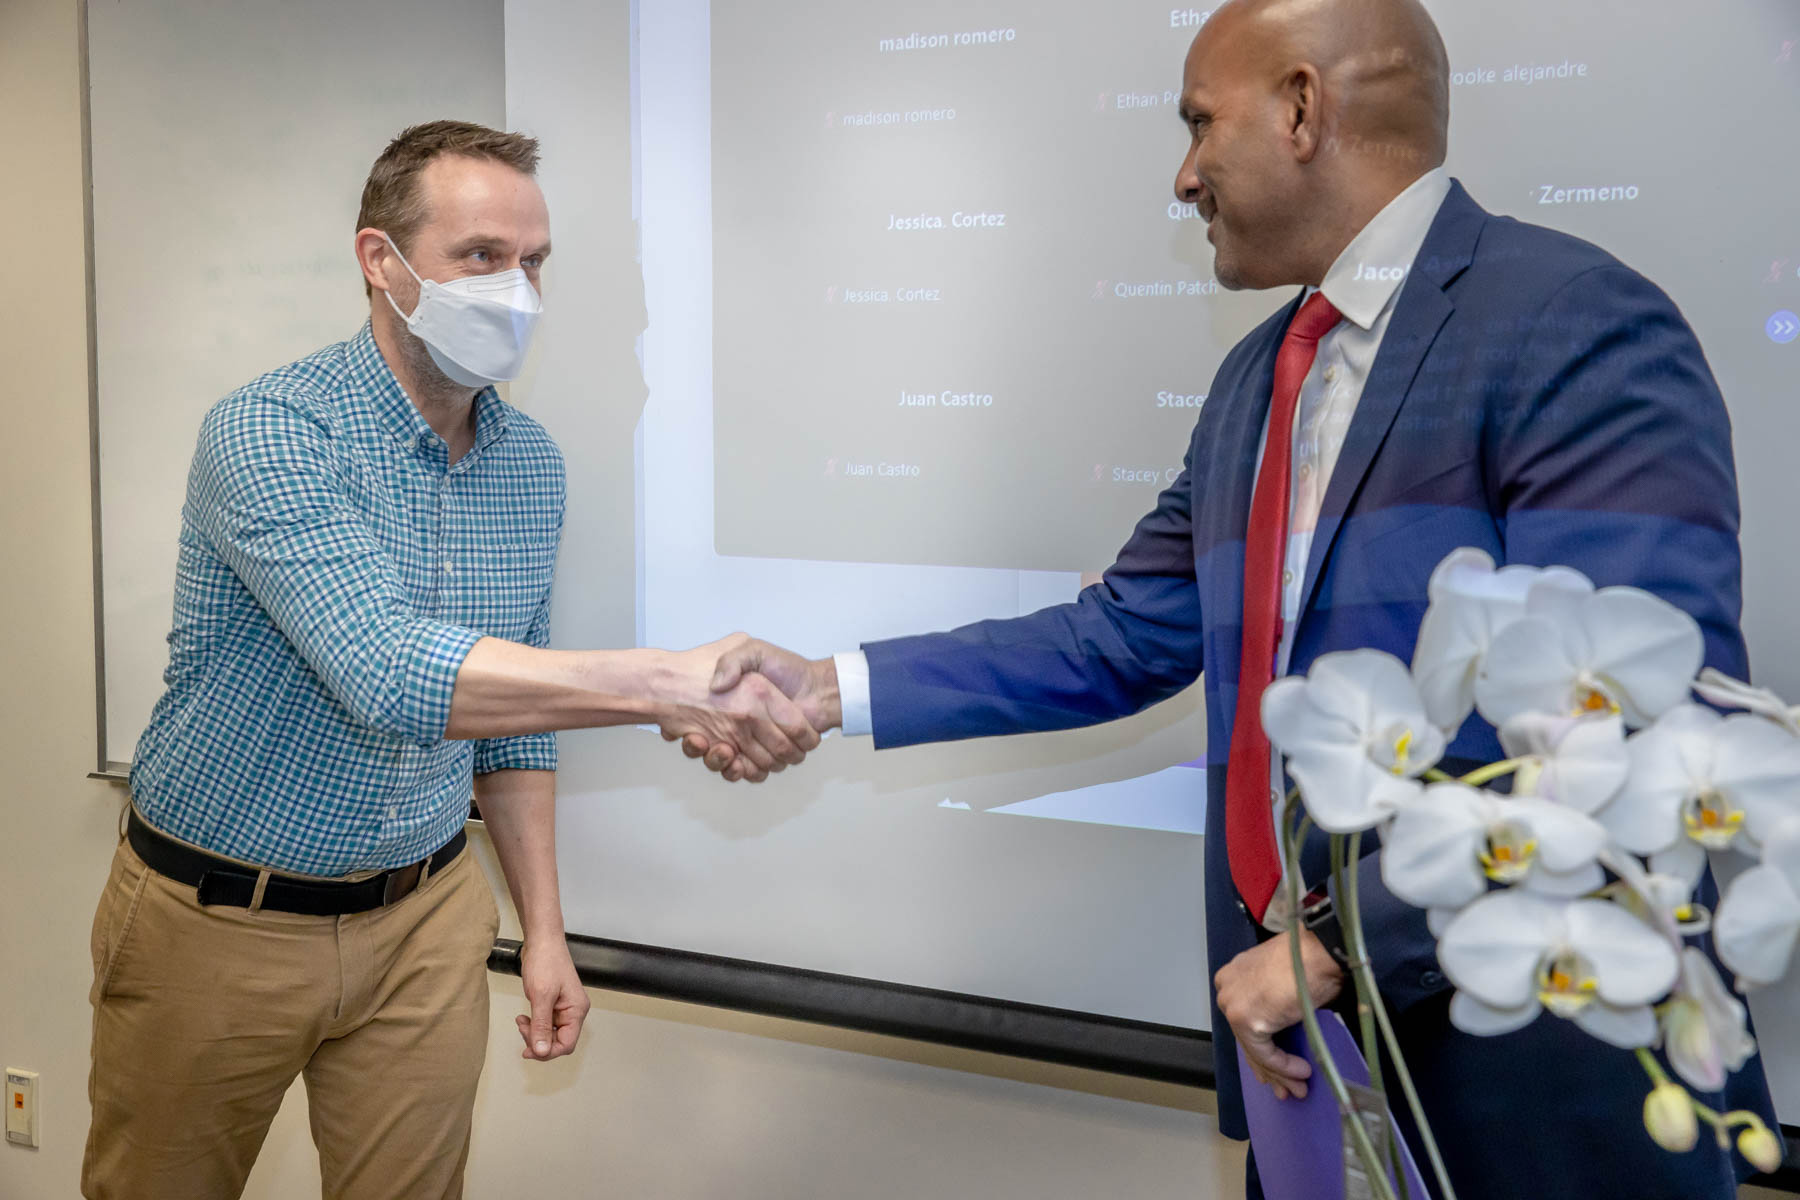 Jeremy Murray, recipient of the university’s 2022-23 Outstanding Service Award, is congratulated by Rafik Mohamed, provost and vice president of Academic Affairs.